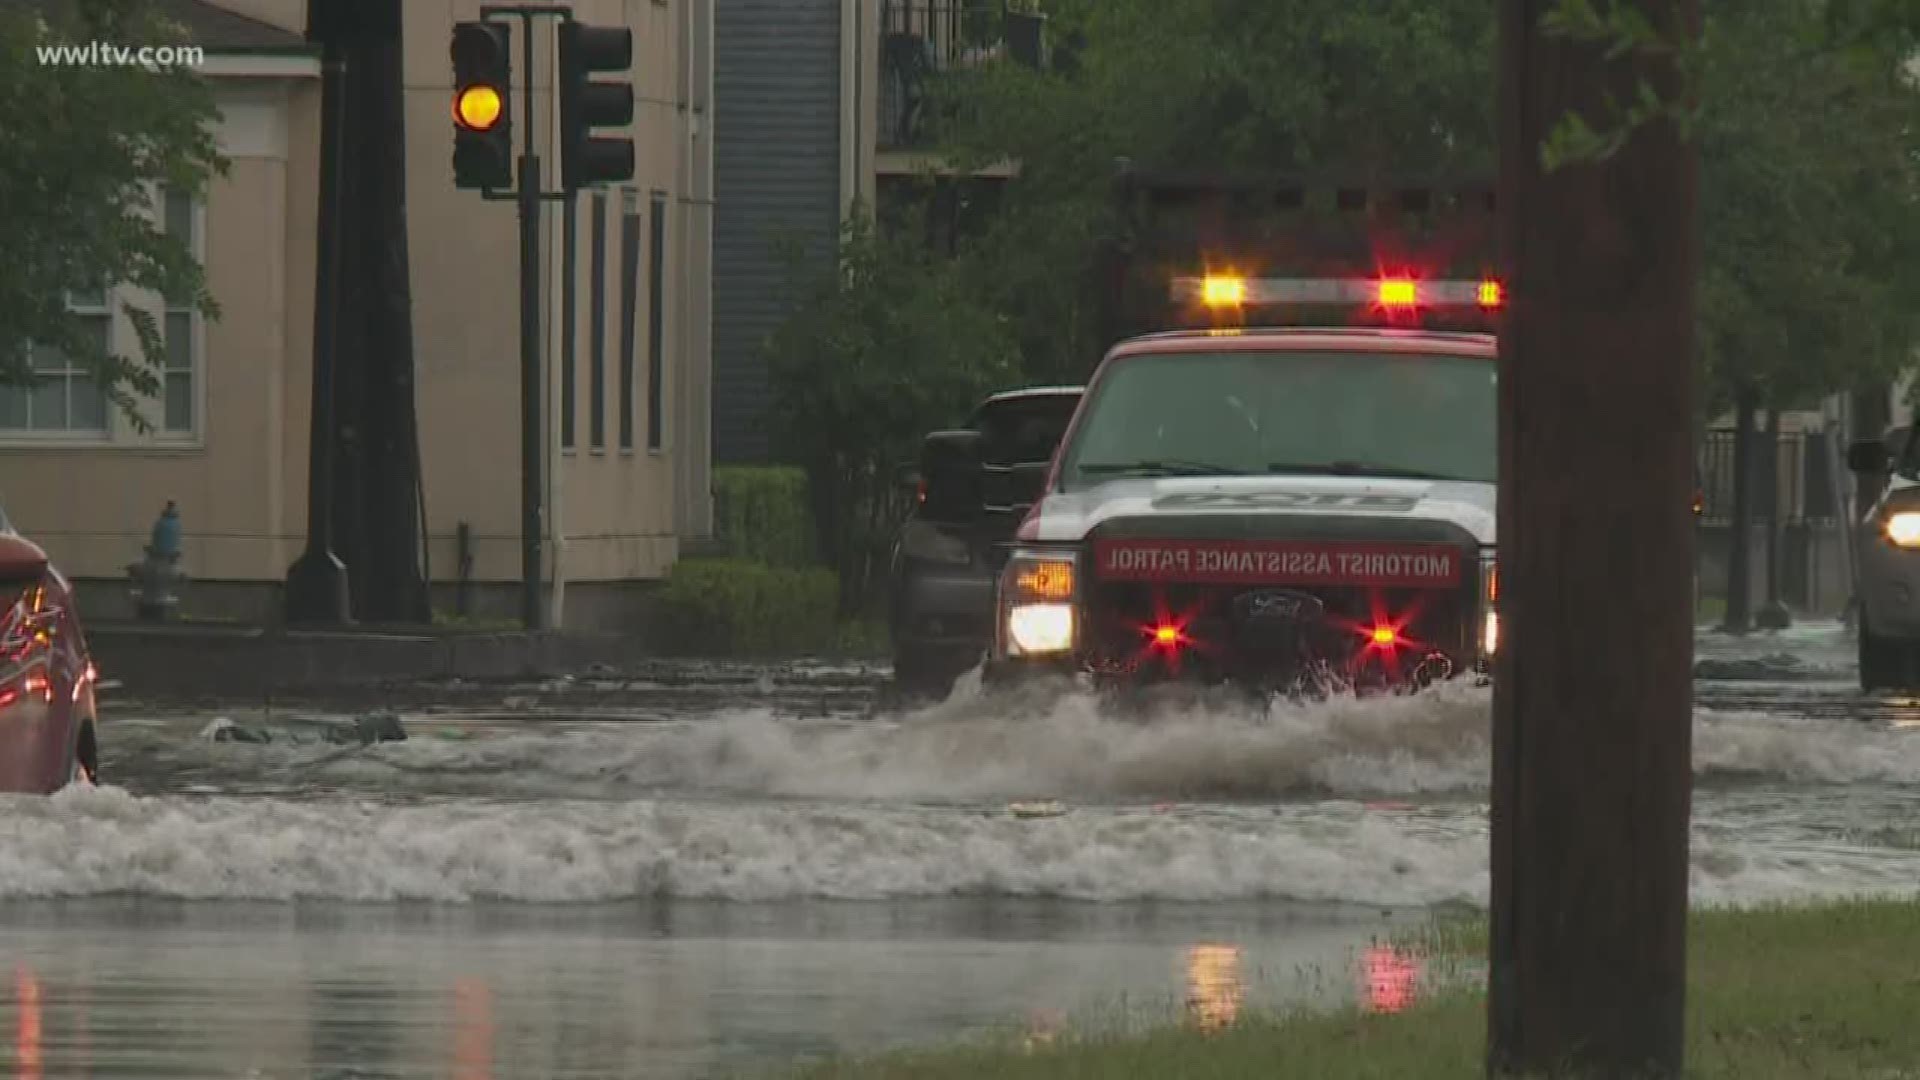 On Sunday, a heavy band of rainstorms hit the Metro Area hard, causing flooding in several neighborhoods.